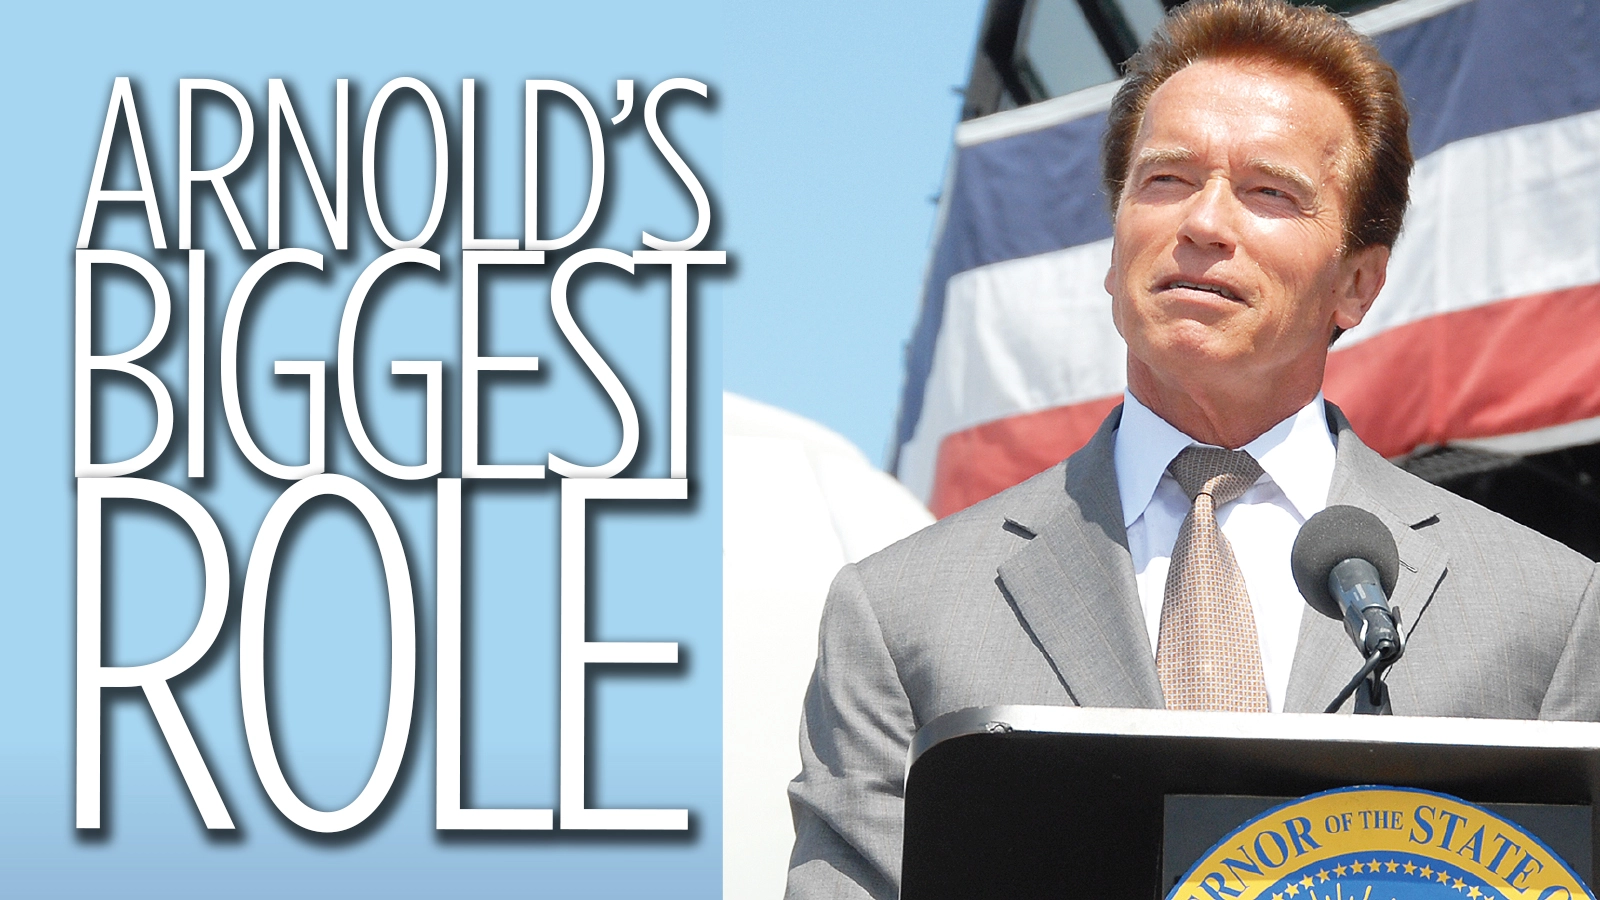 Arnold speaking publicly